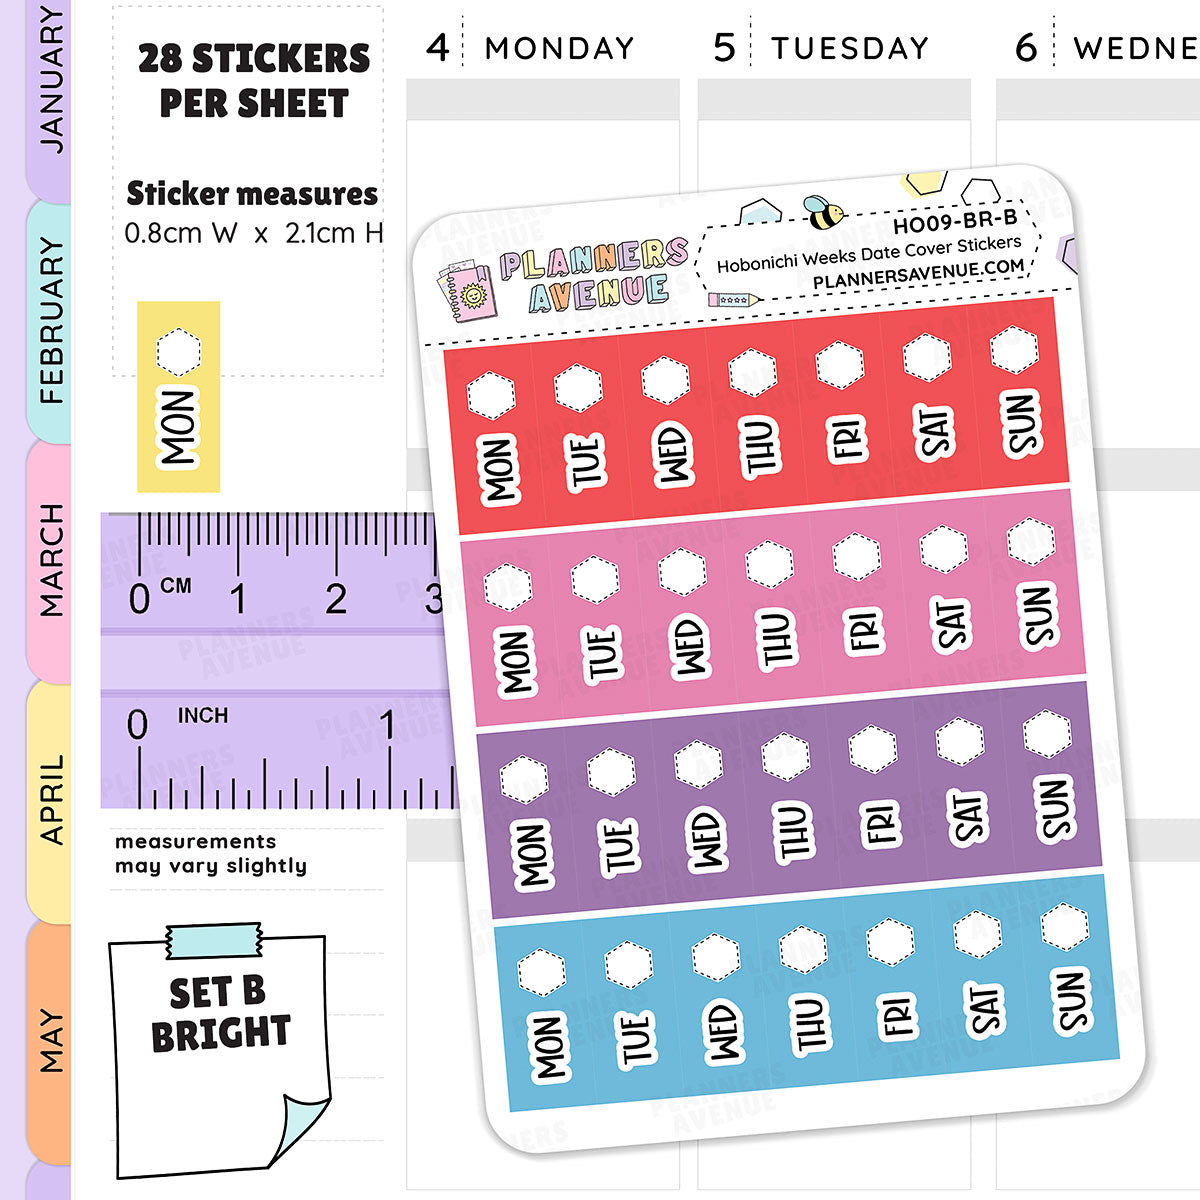 Hobonichi Weeks Date Cover Stickers